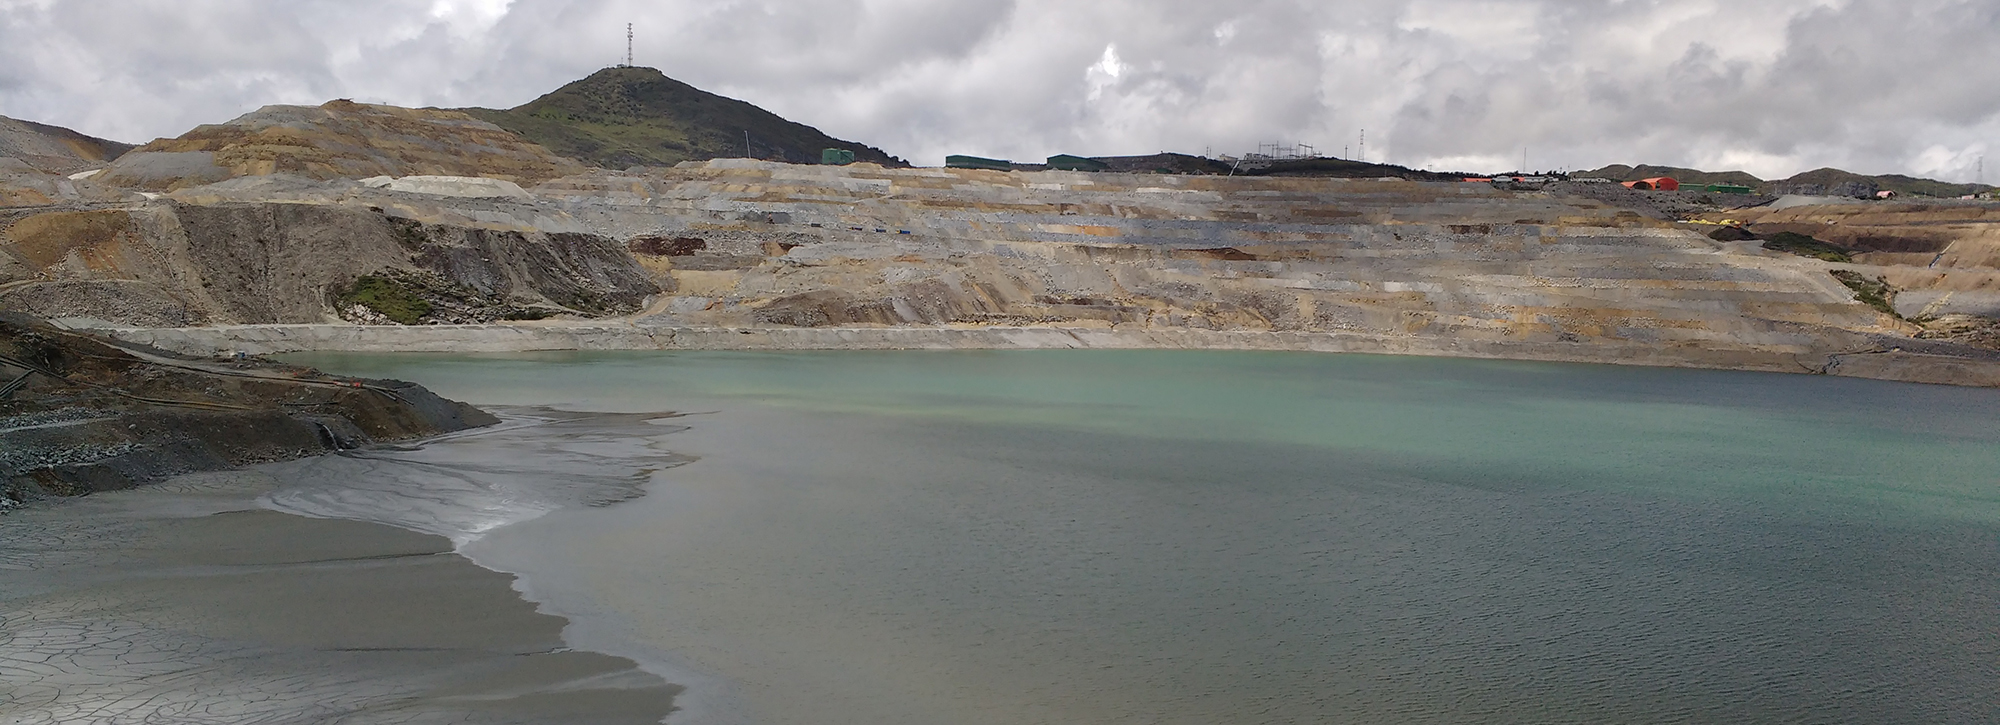 An example tailings dam